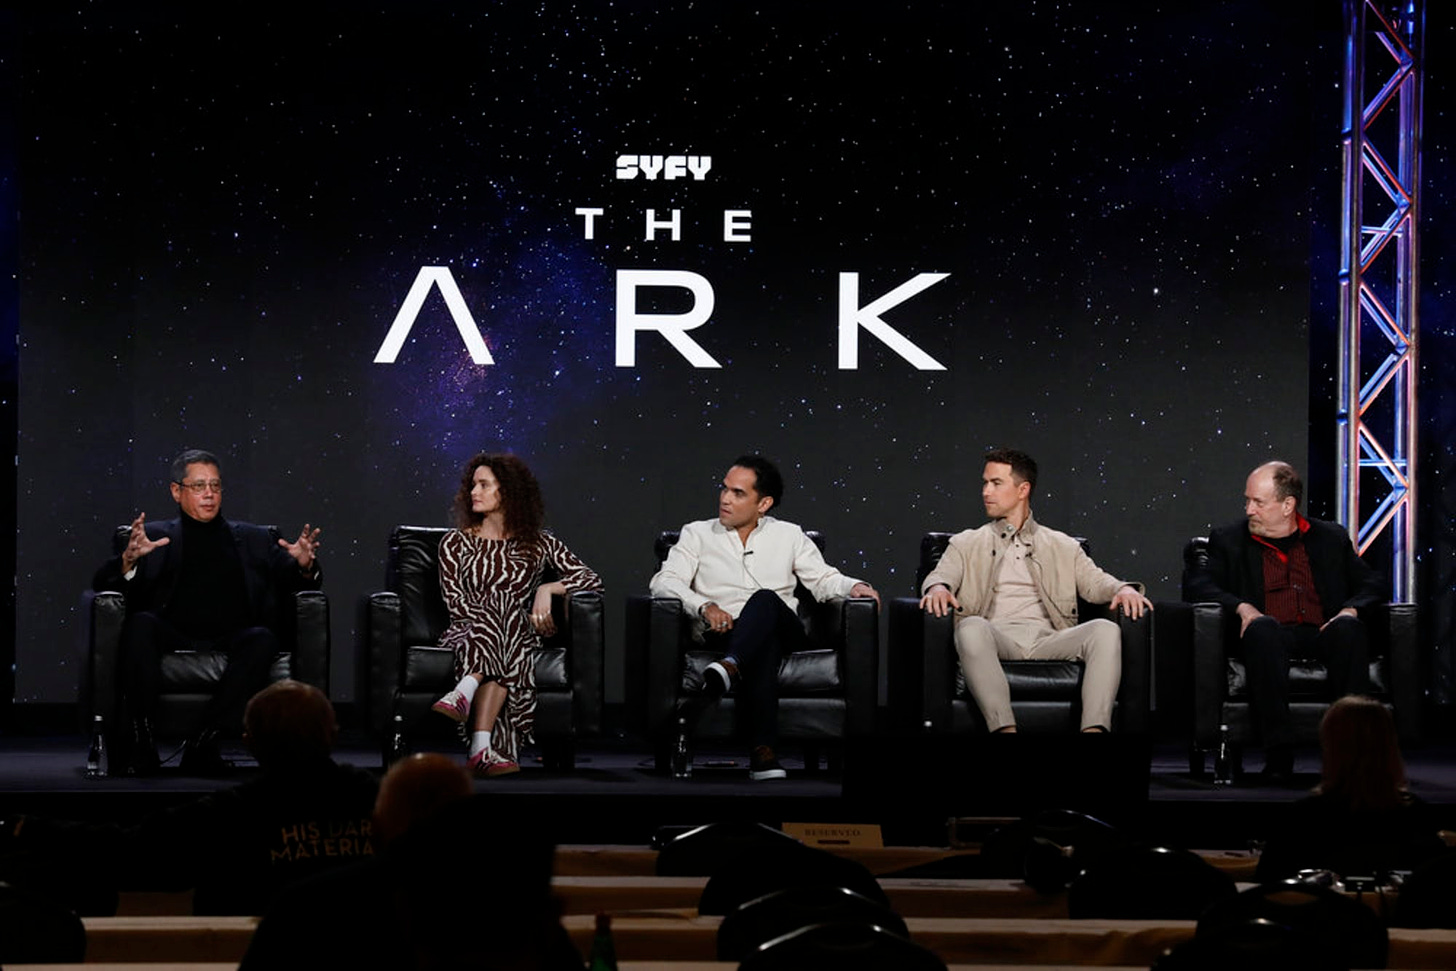 Dean Devlin and Jonathan Glassner discuss the inspiration for The Ark